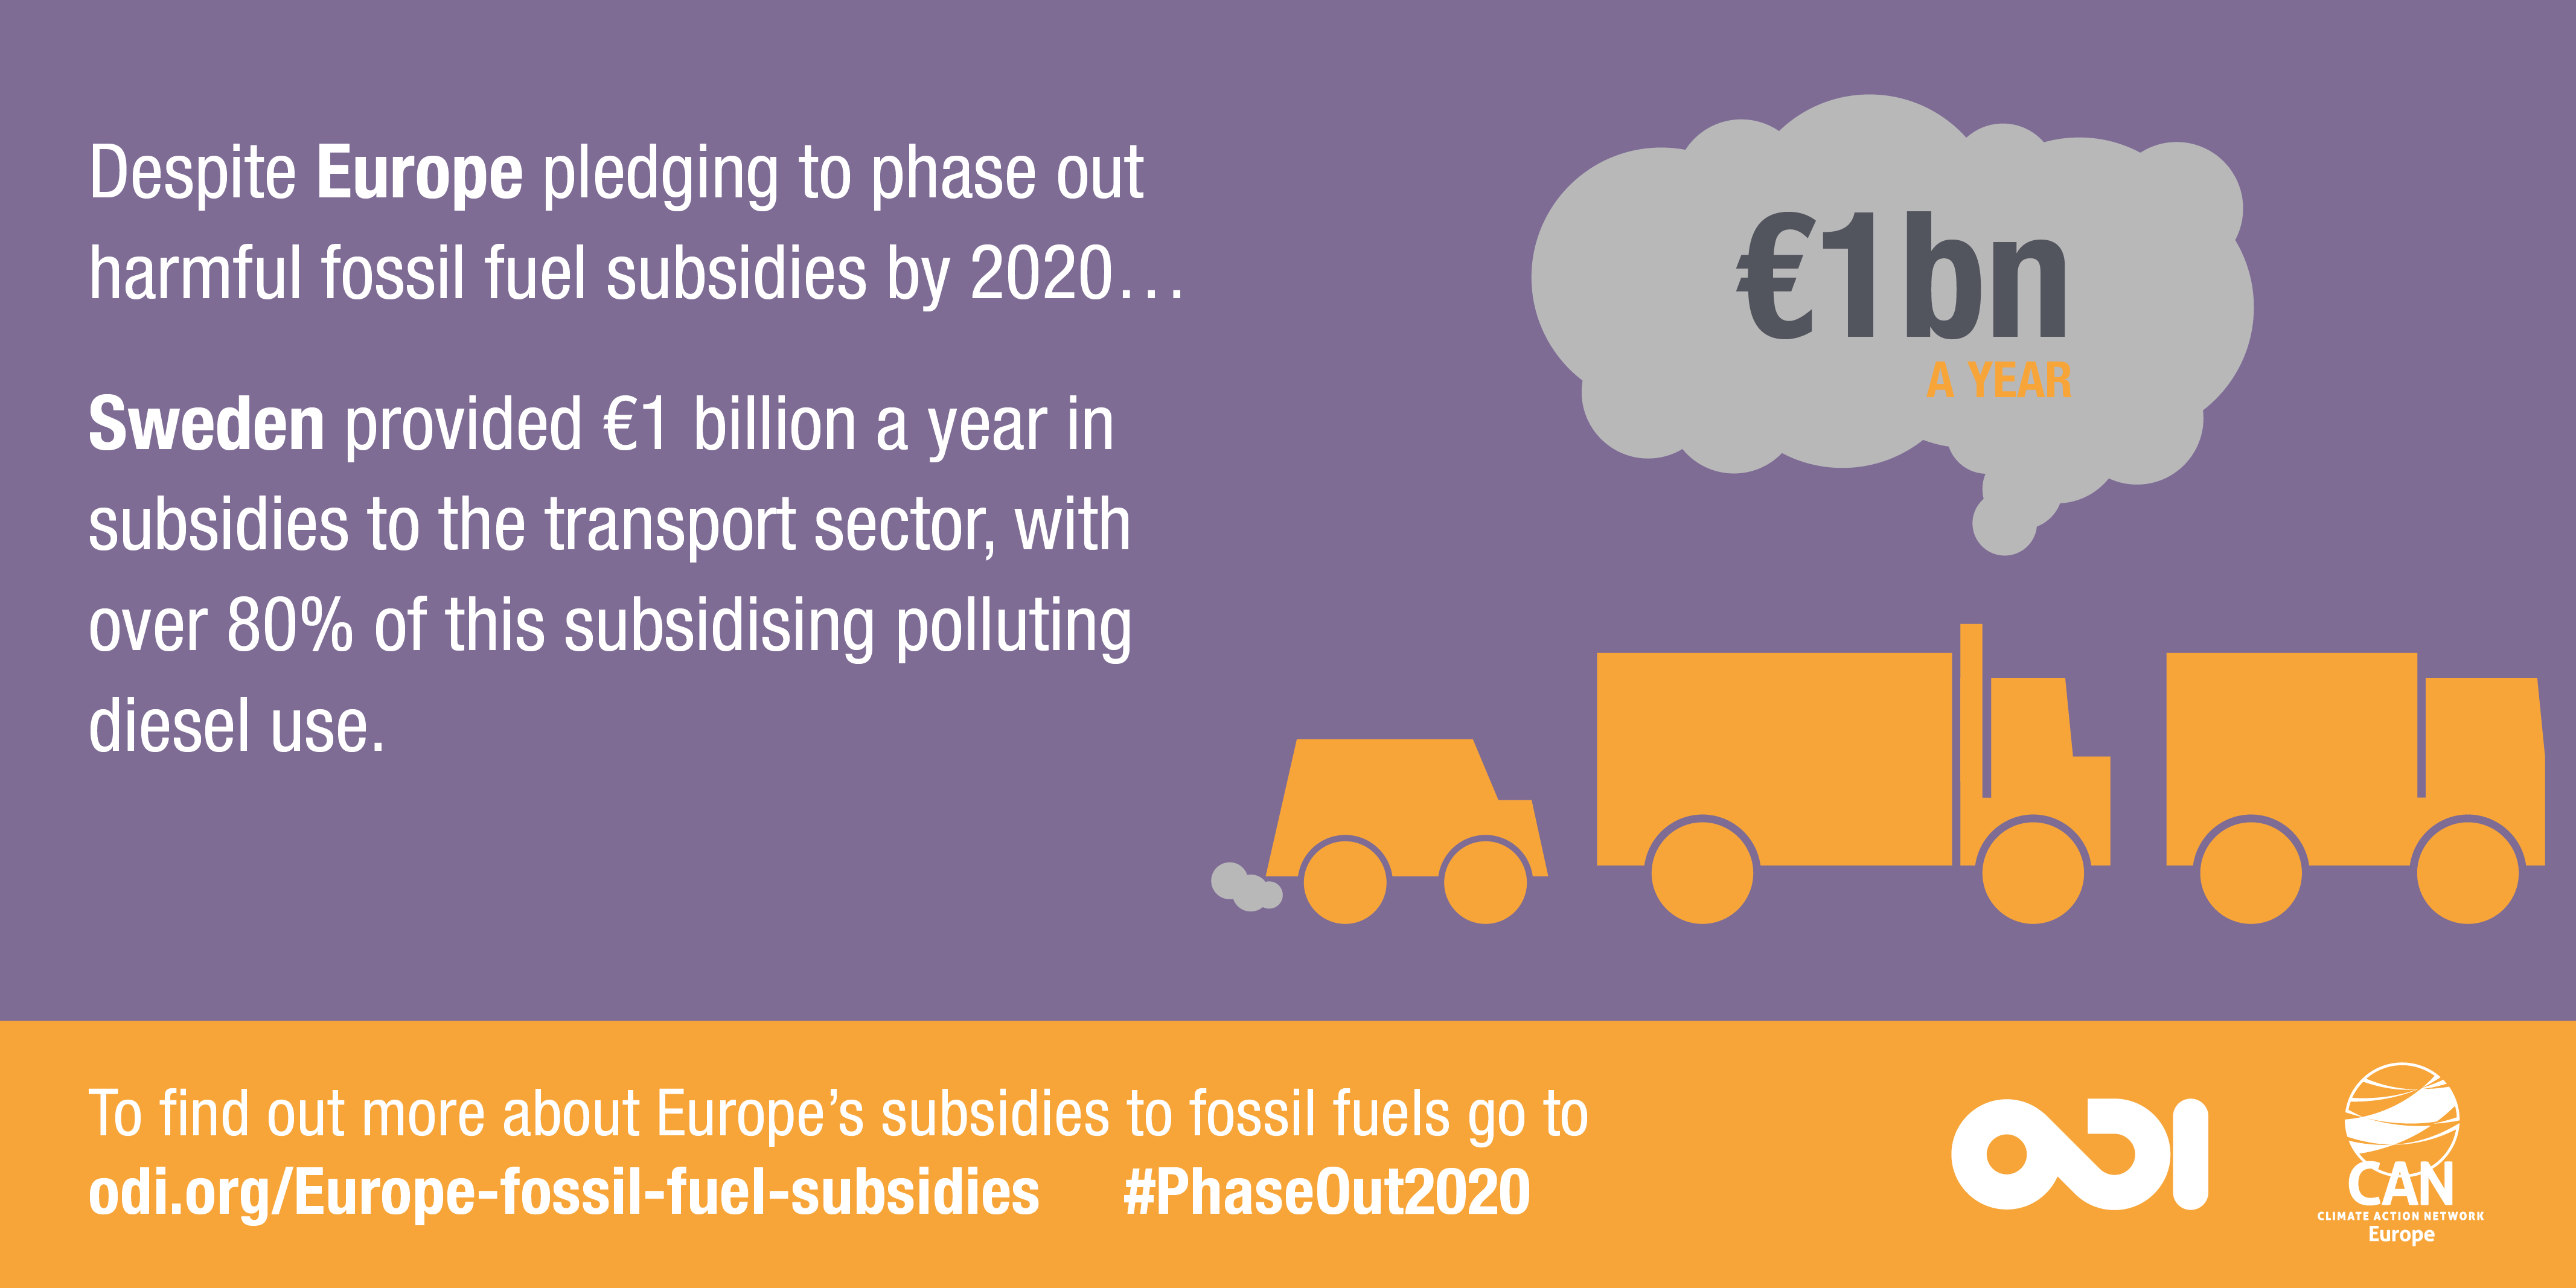 Infographic: Sweden provided €1 billion a year in subsidies to the transport sector, with over 80% of this subsidising polluting diesel use.